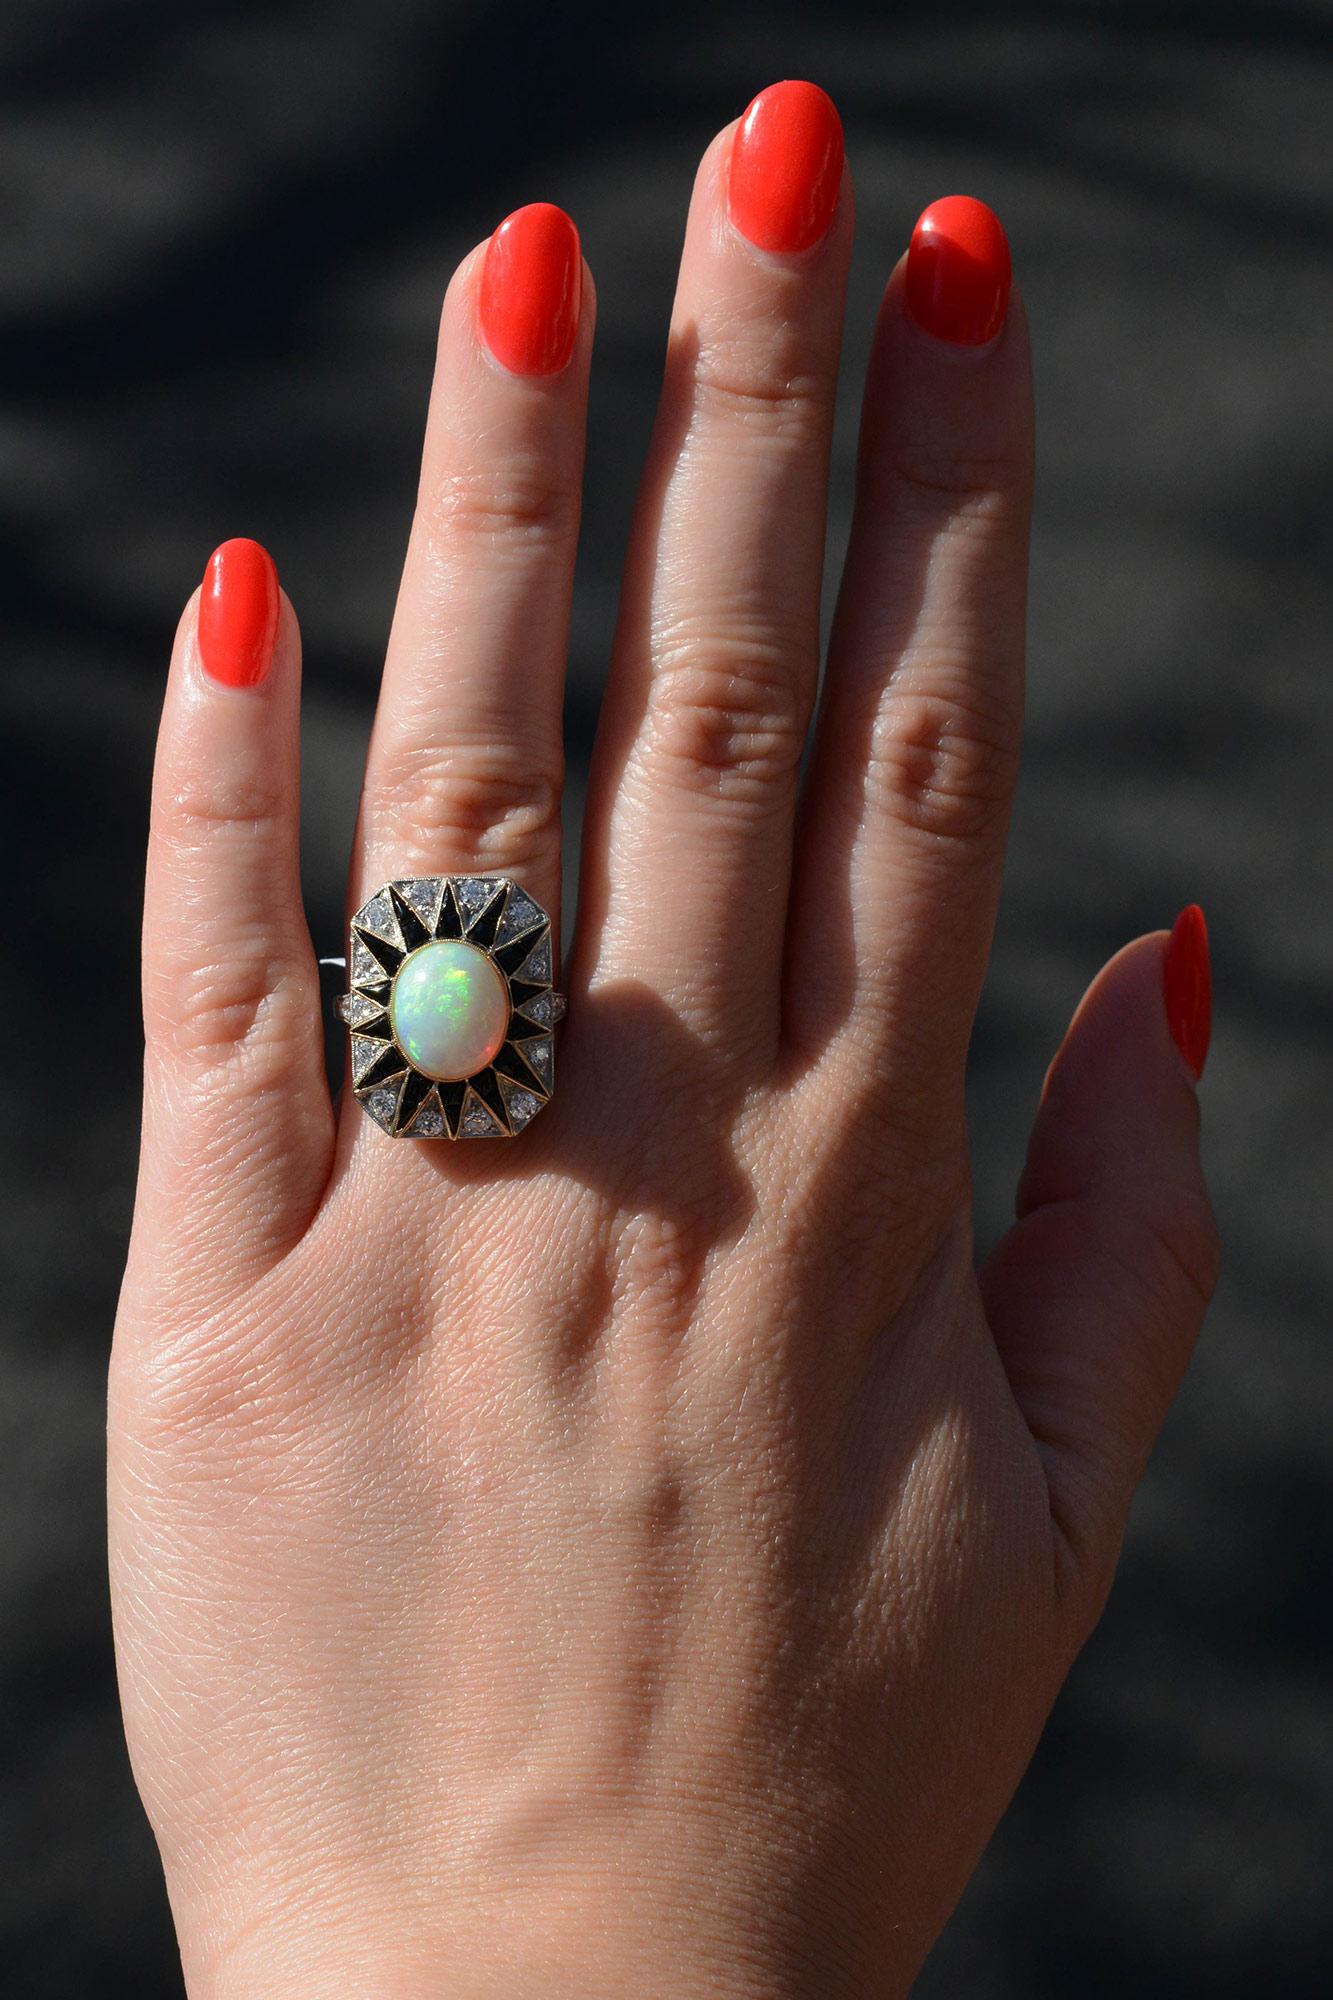 Capture your unique style with this beautiful 2.82 carat opal cocktail ring. Perfect for a statement piece, this mysterious, Art Deco inspired ring features an exotic Australian fiery opal with a fabulous play of color and a streamlined sunburst